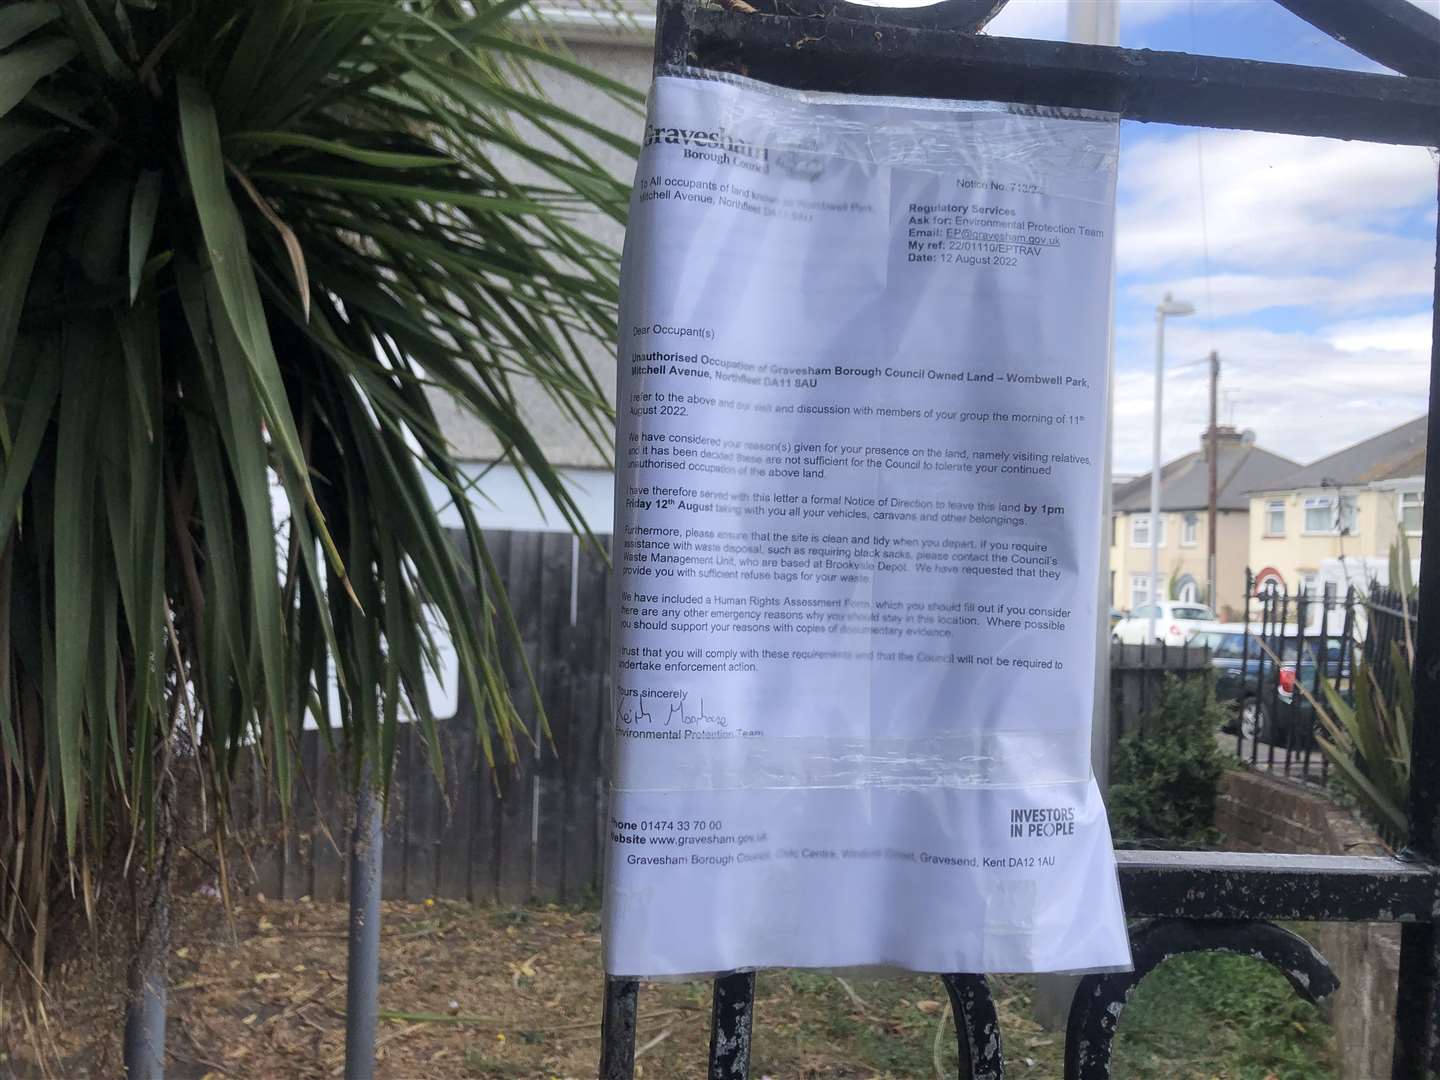 The eviction notice on the park gates